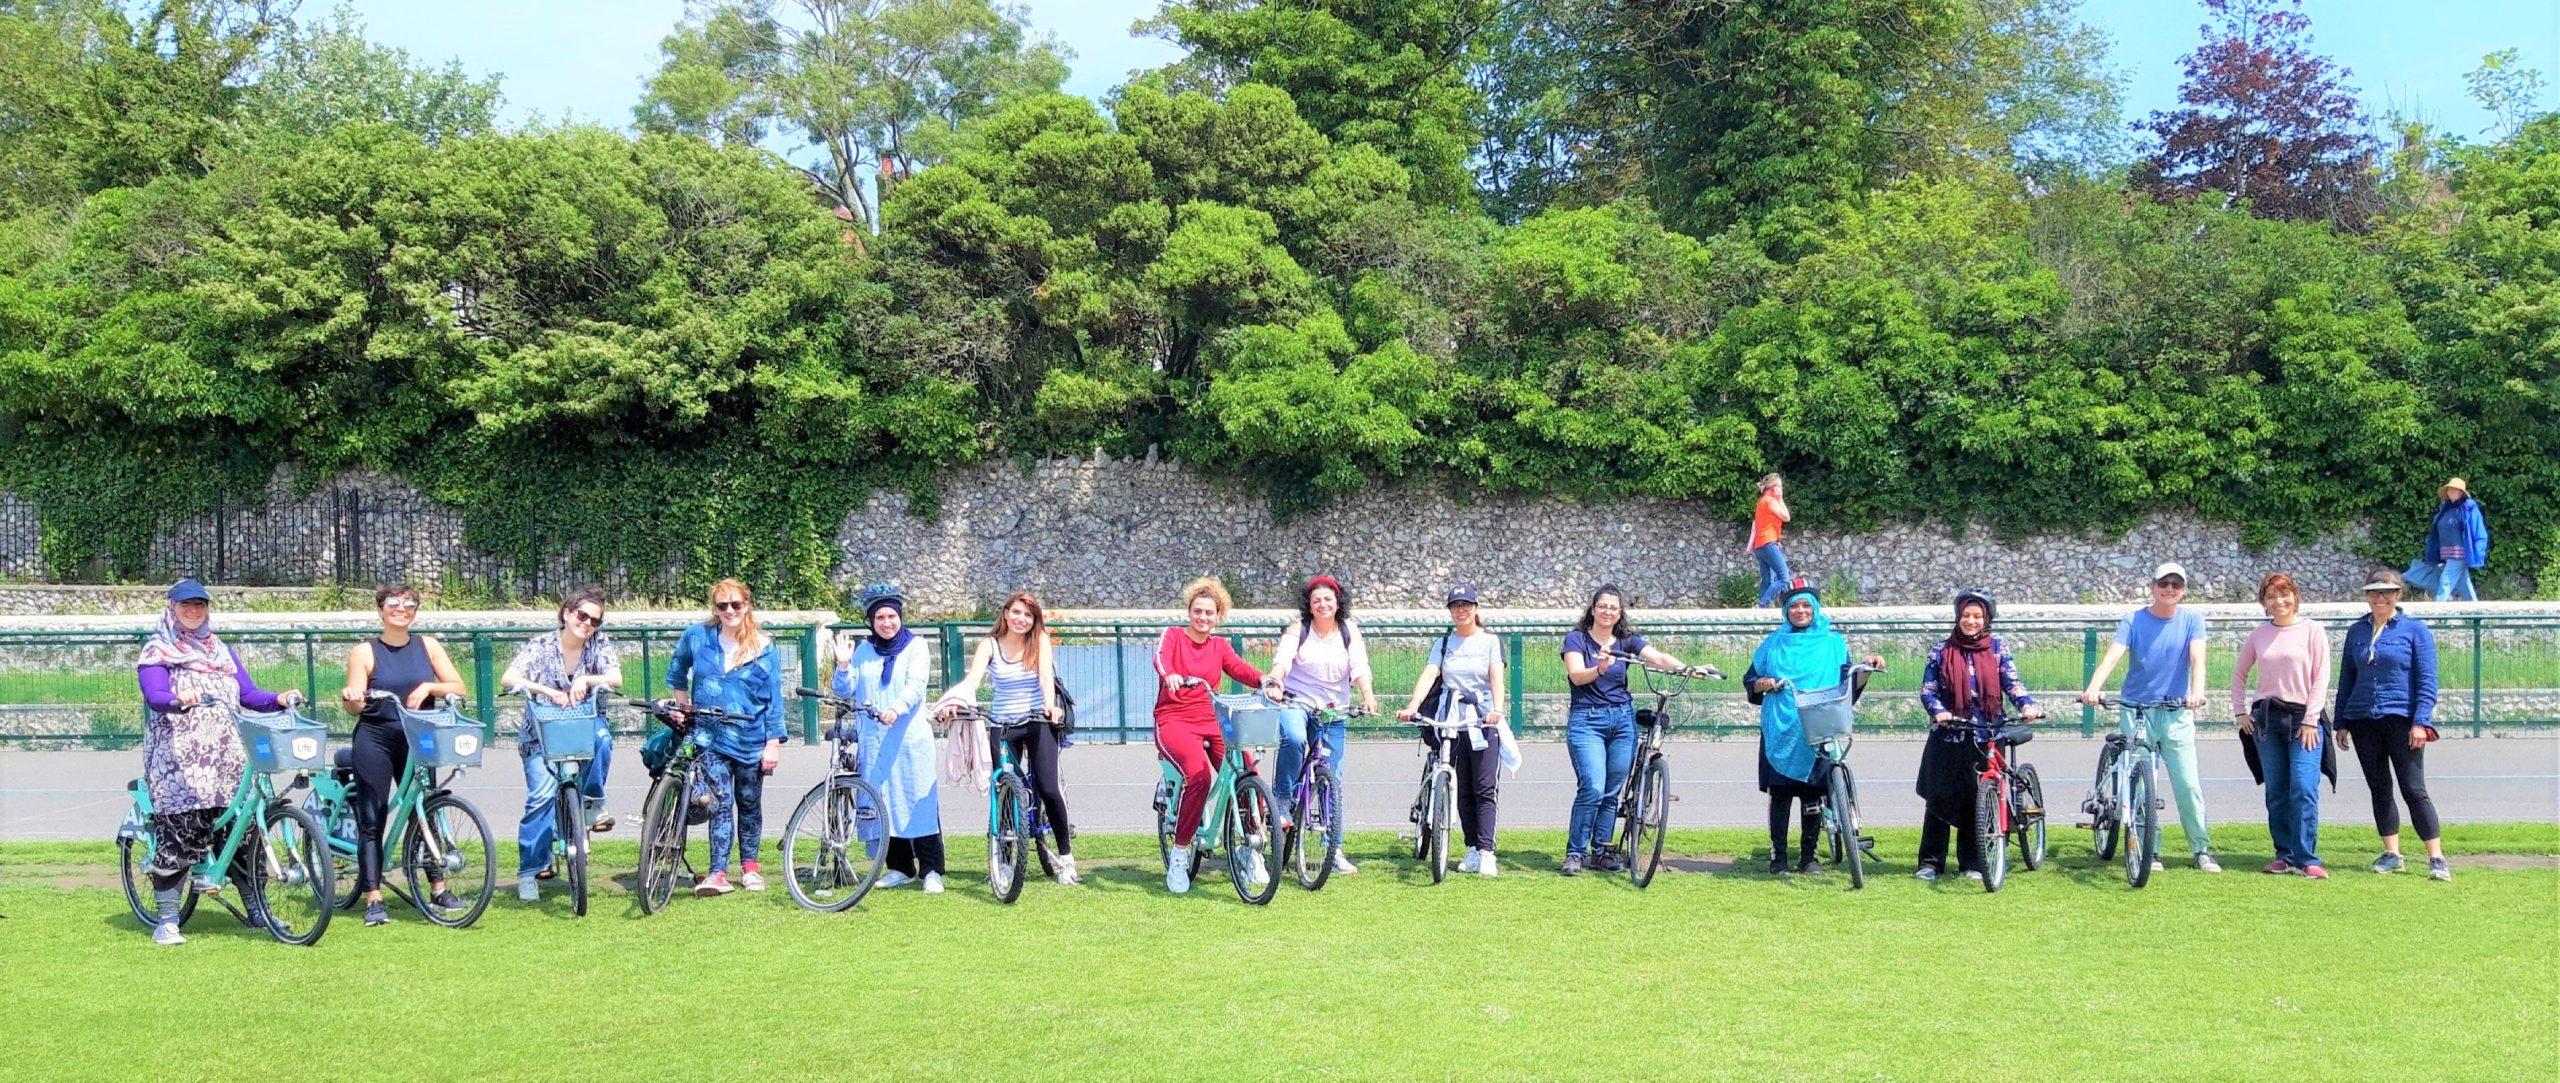 A group of women pose with bicycles in Preston Park.